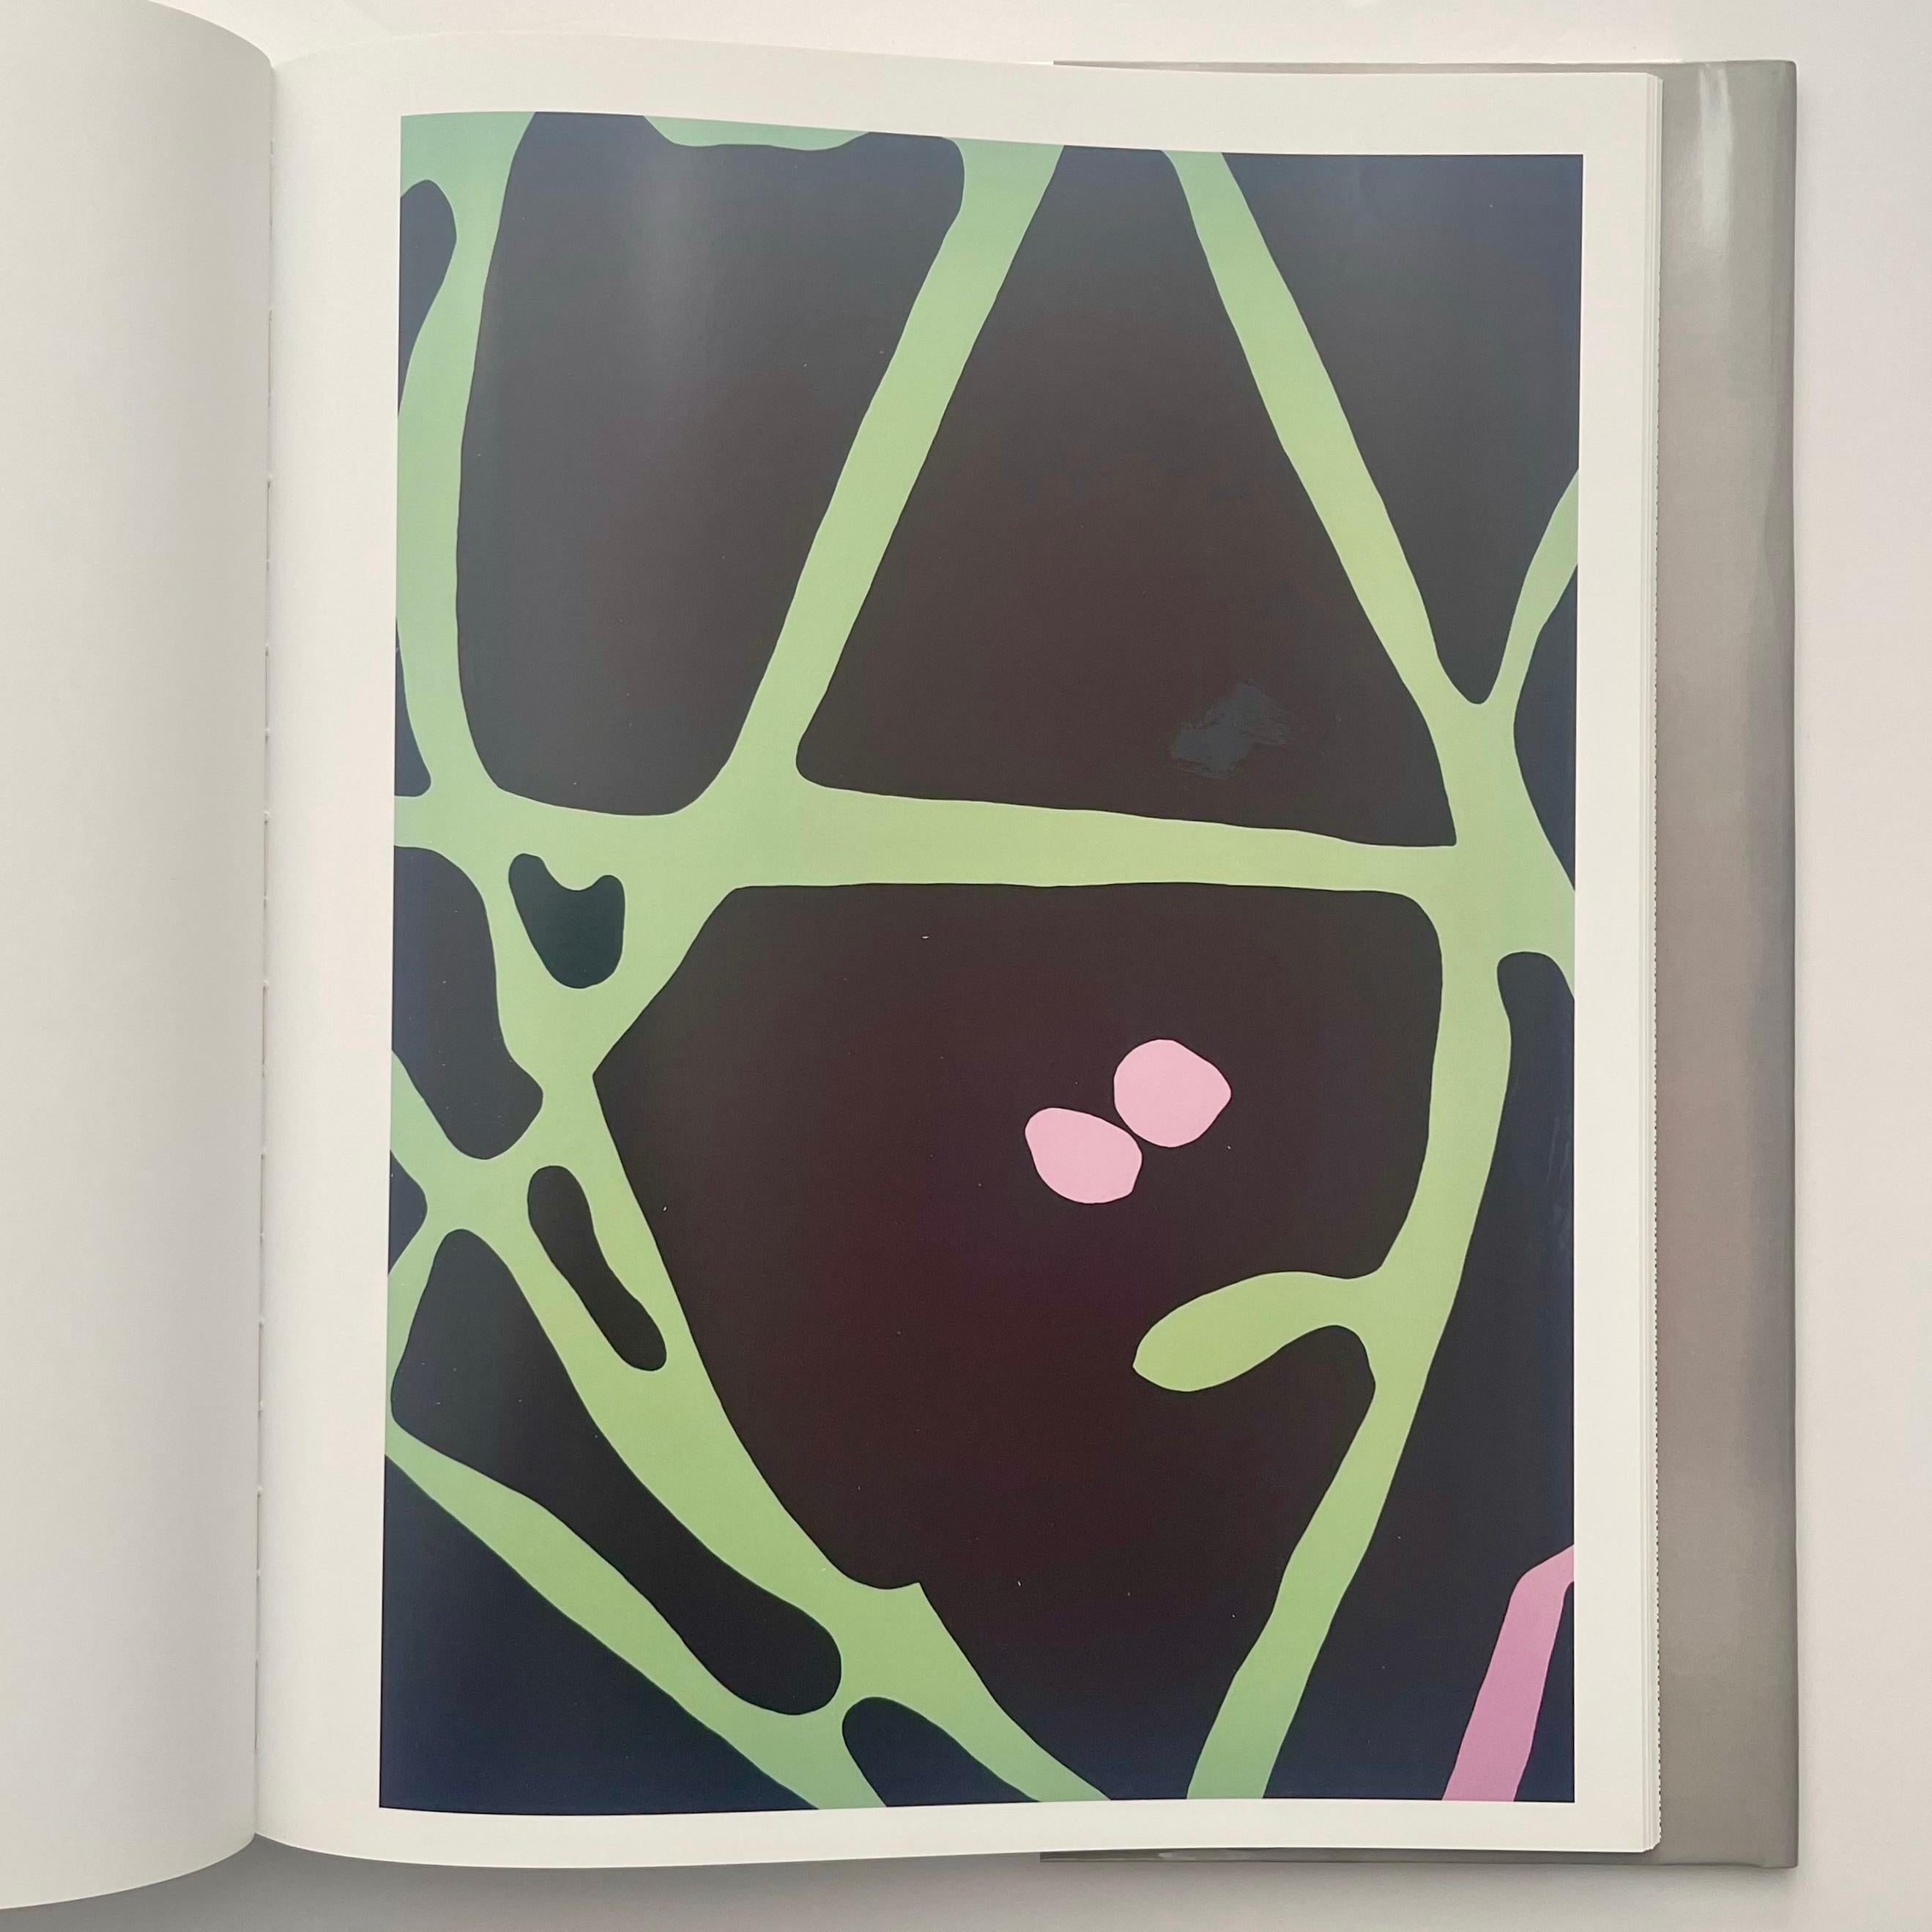 Gary Hume, A Cat on Lap, Monograph, 1st Edition 2009 For Sale 3